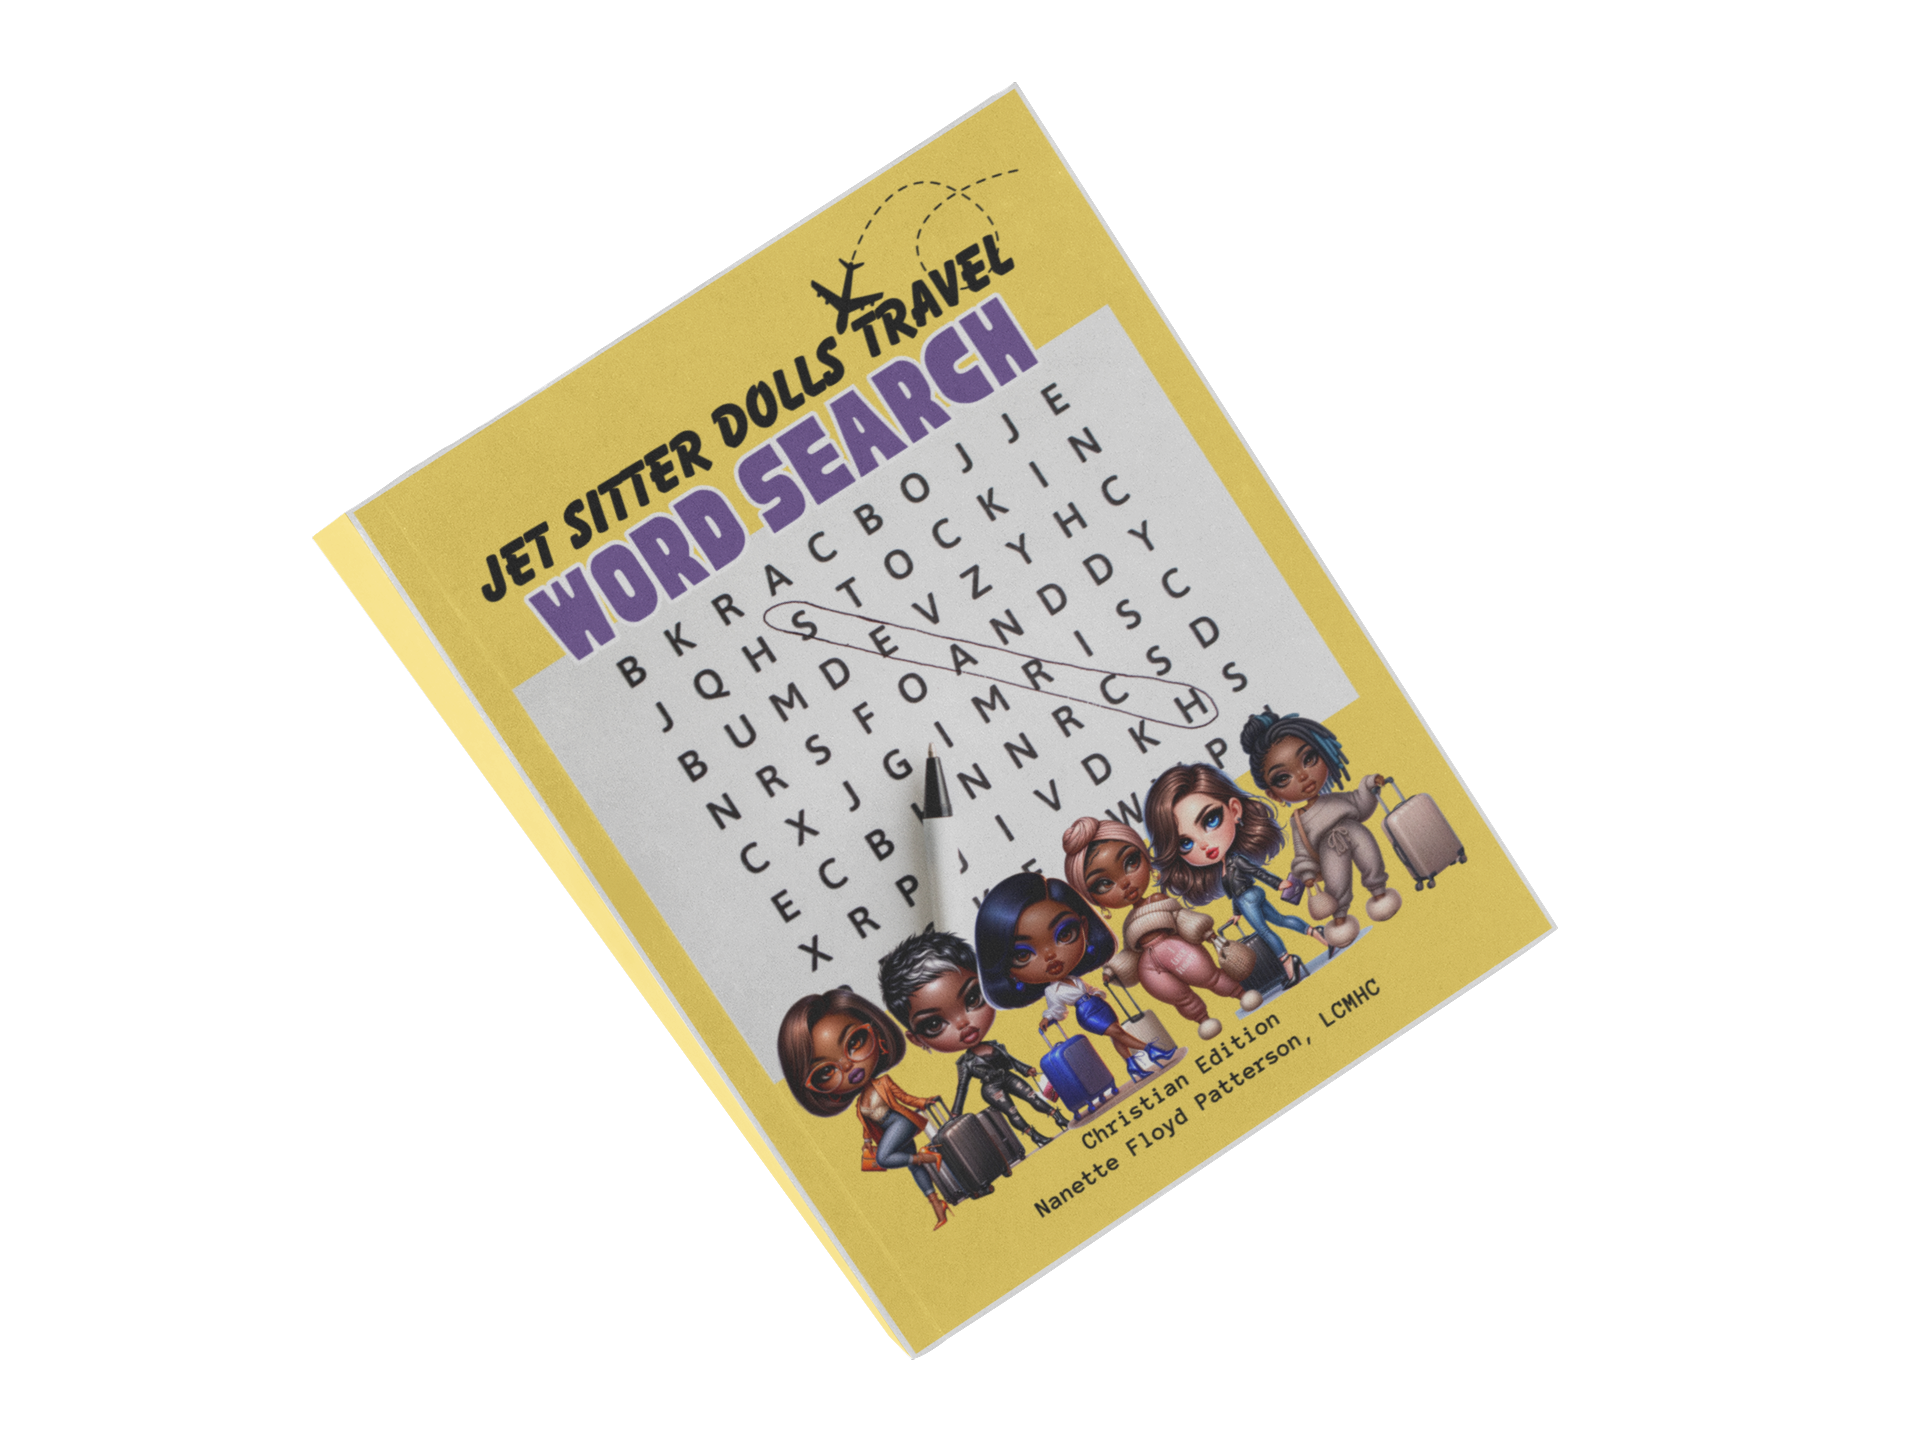 Jet Sitter Dolls Travel Word Search (Christian Edition)